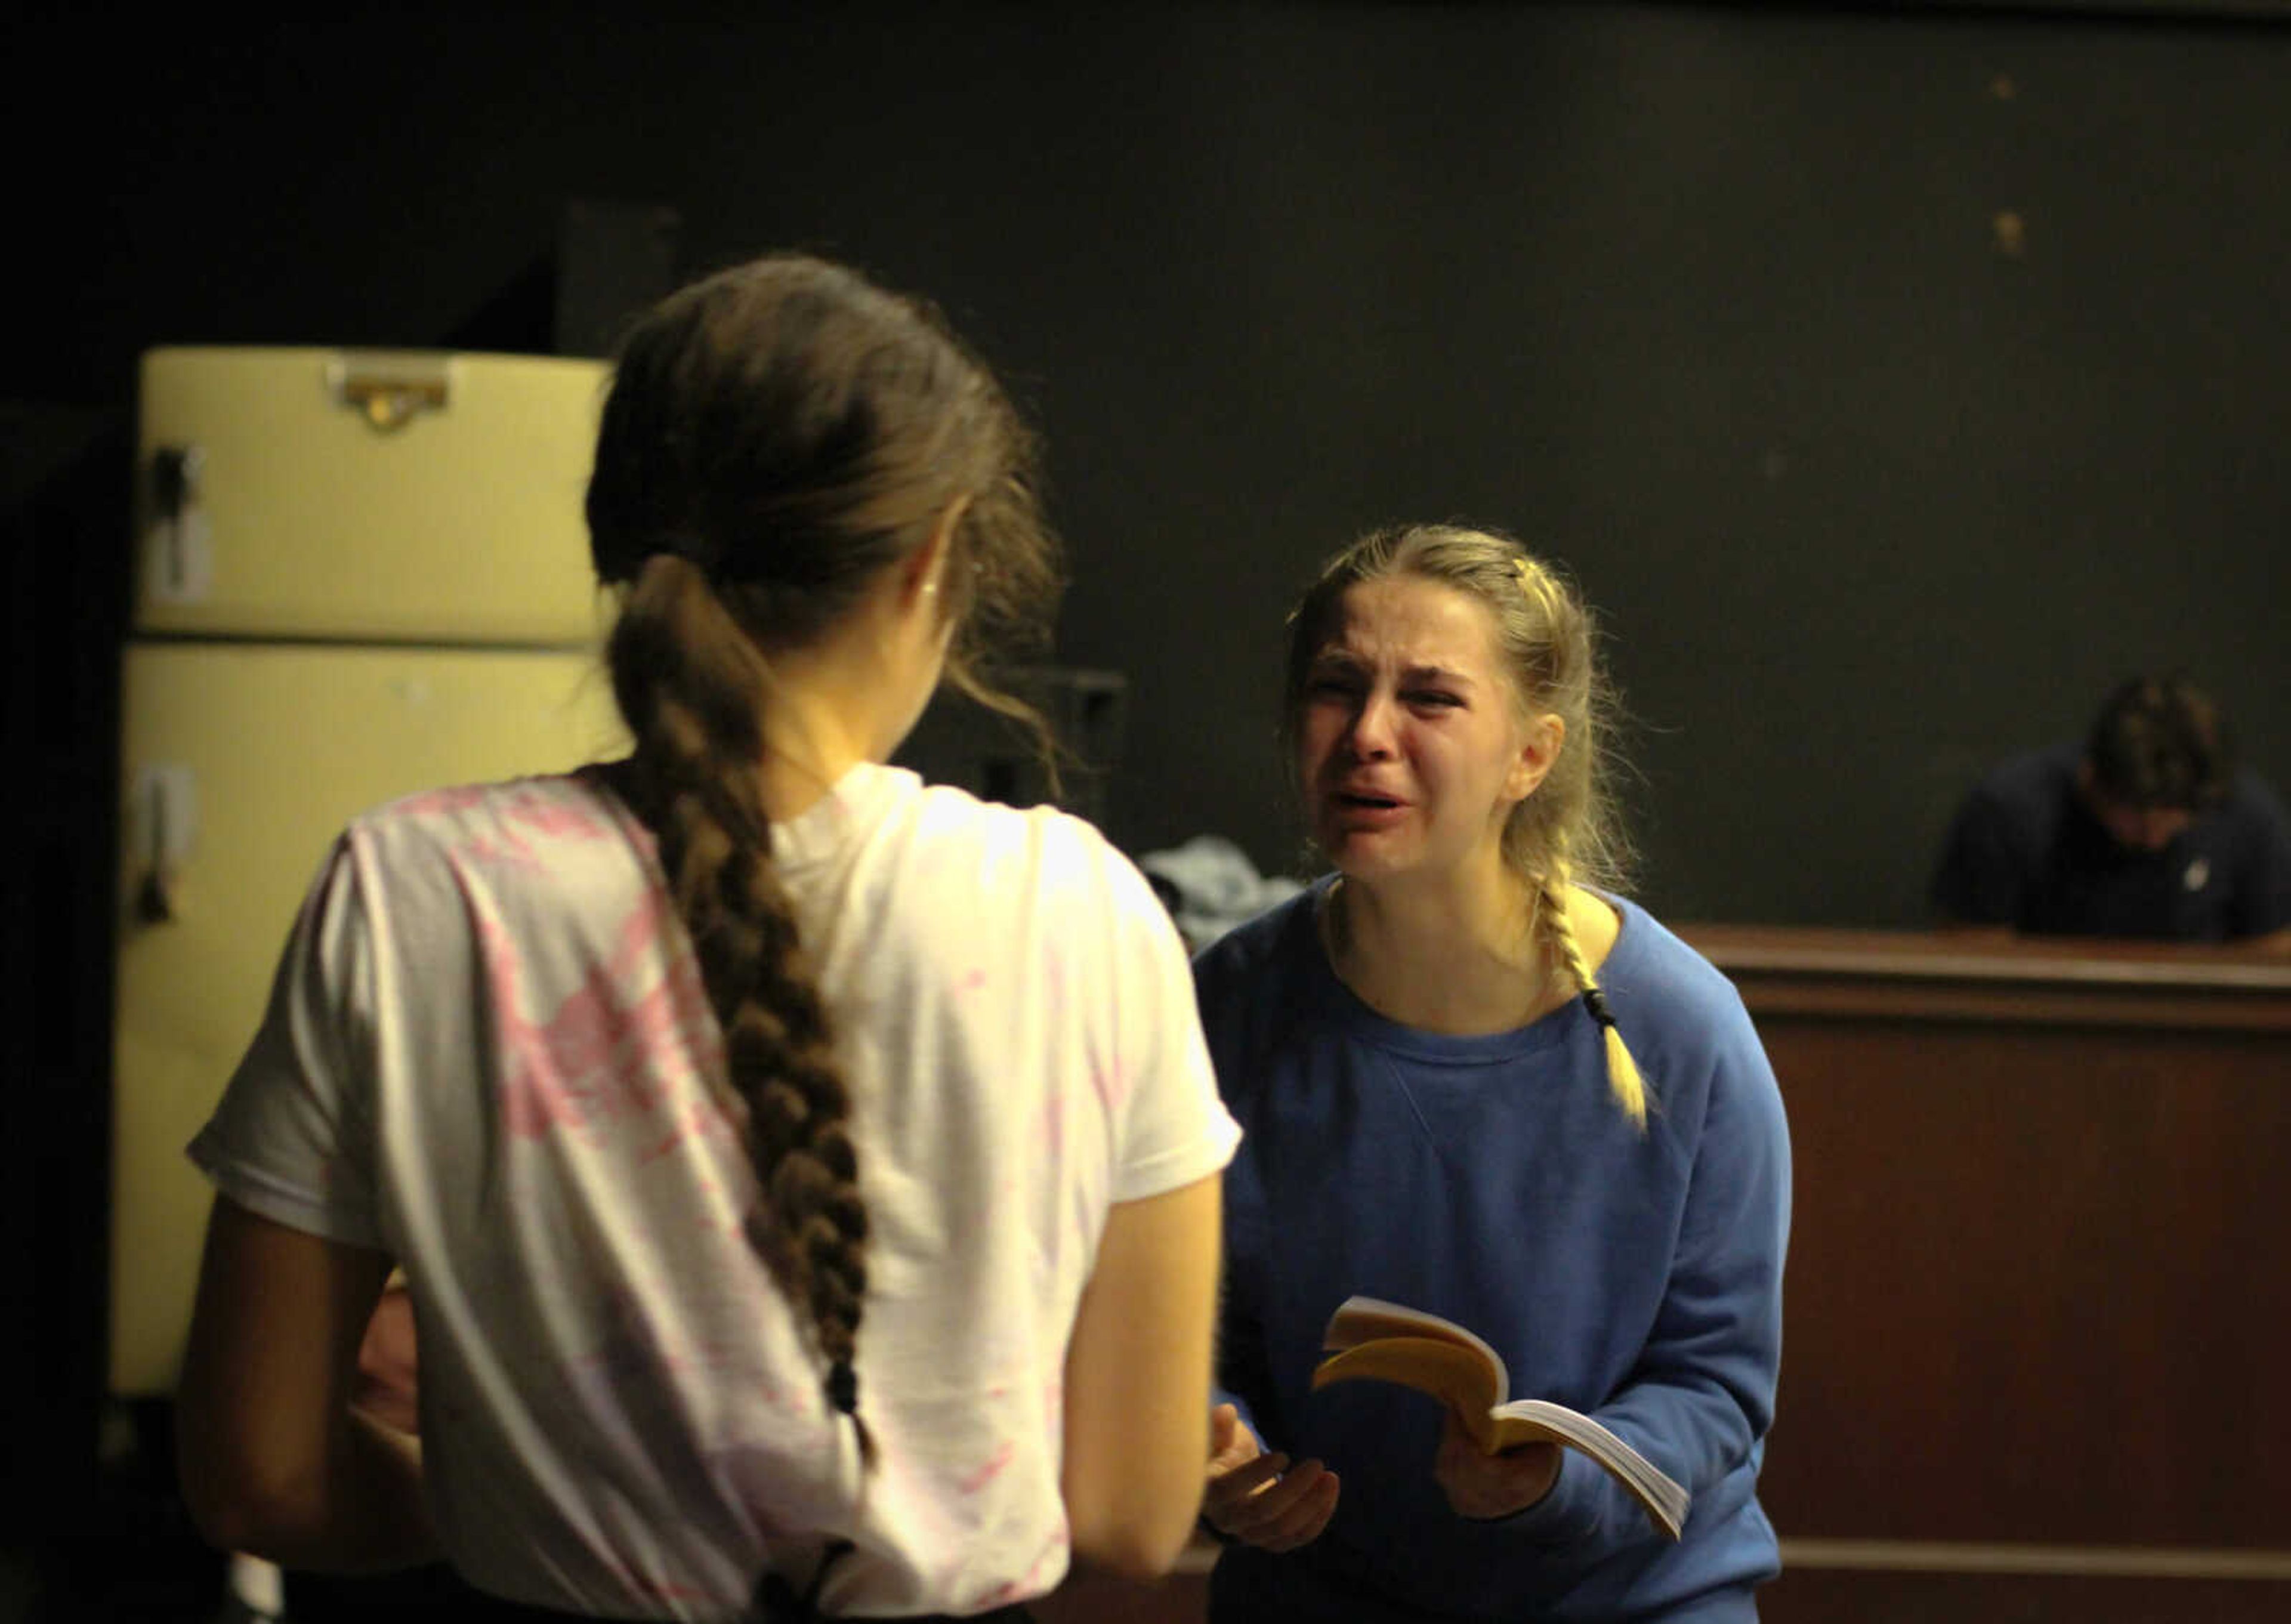 MacKenzie Hamilton and Dempsey Hankins perform a scene at "Our Town" rehearsal.